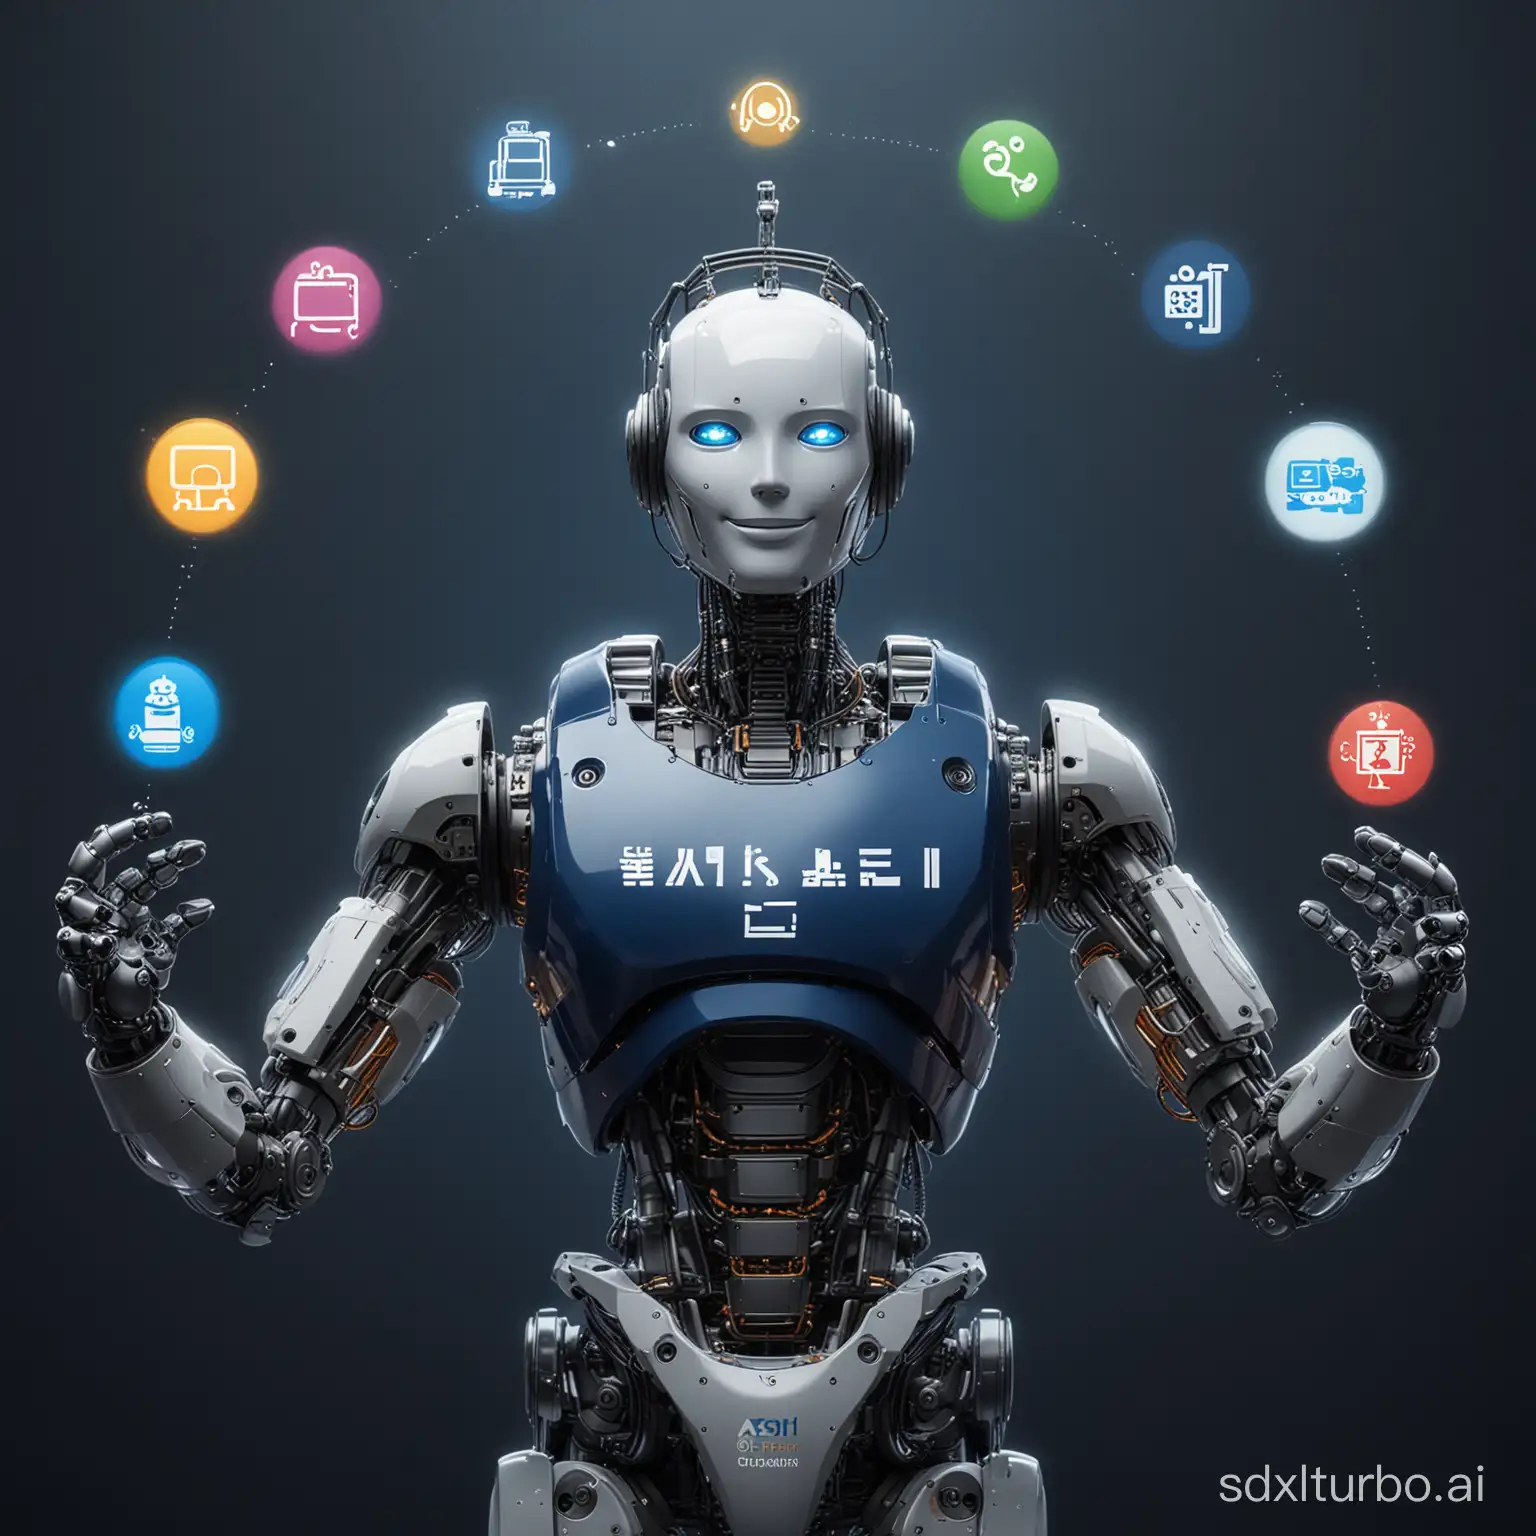 create image of an environment with dark navy blue background, where a front facing half bust smiling robot with the word "AI" in the middle of its chest is giving a helping hand out to the viewer. The robot is having a "Halo ring" behind its head showing logos of six most famous large Language Model AI products like, ChatGPT, Perlexity, Dall-E, Midjourney, Googl Gemini, Krutrim AI.